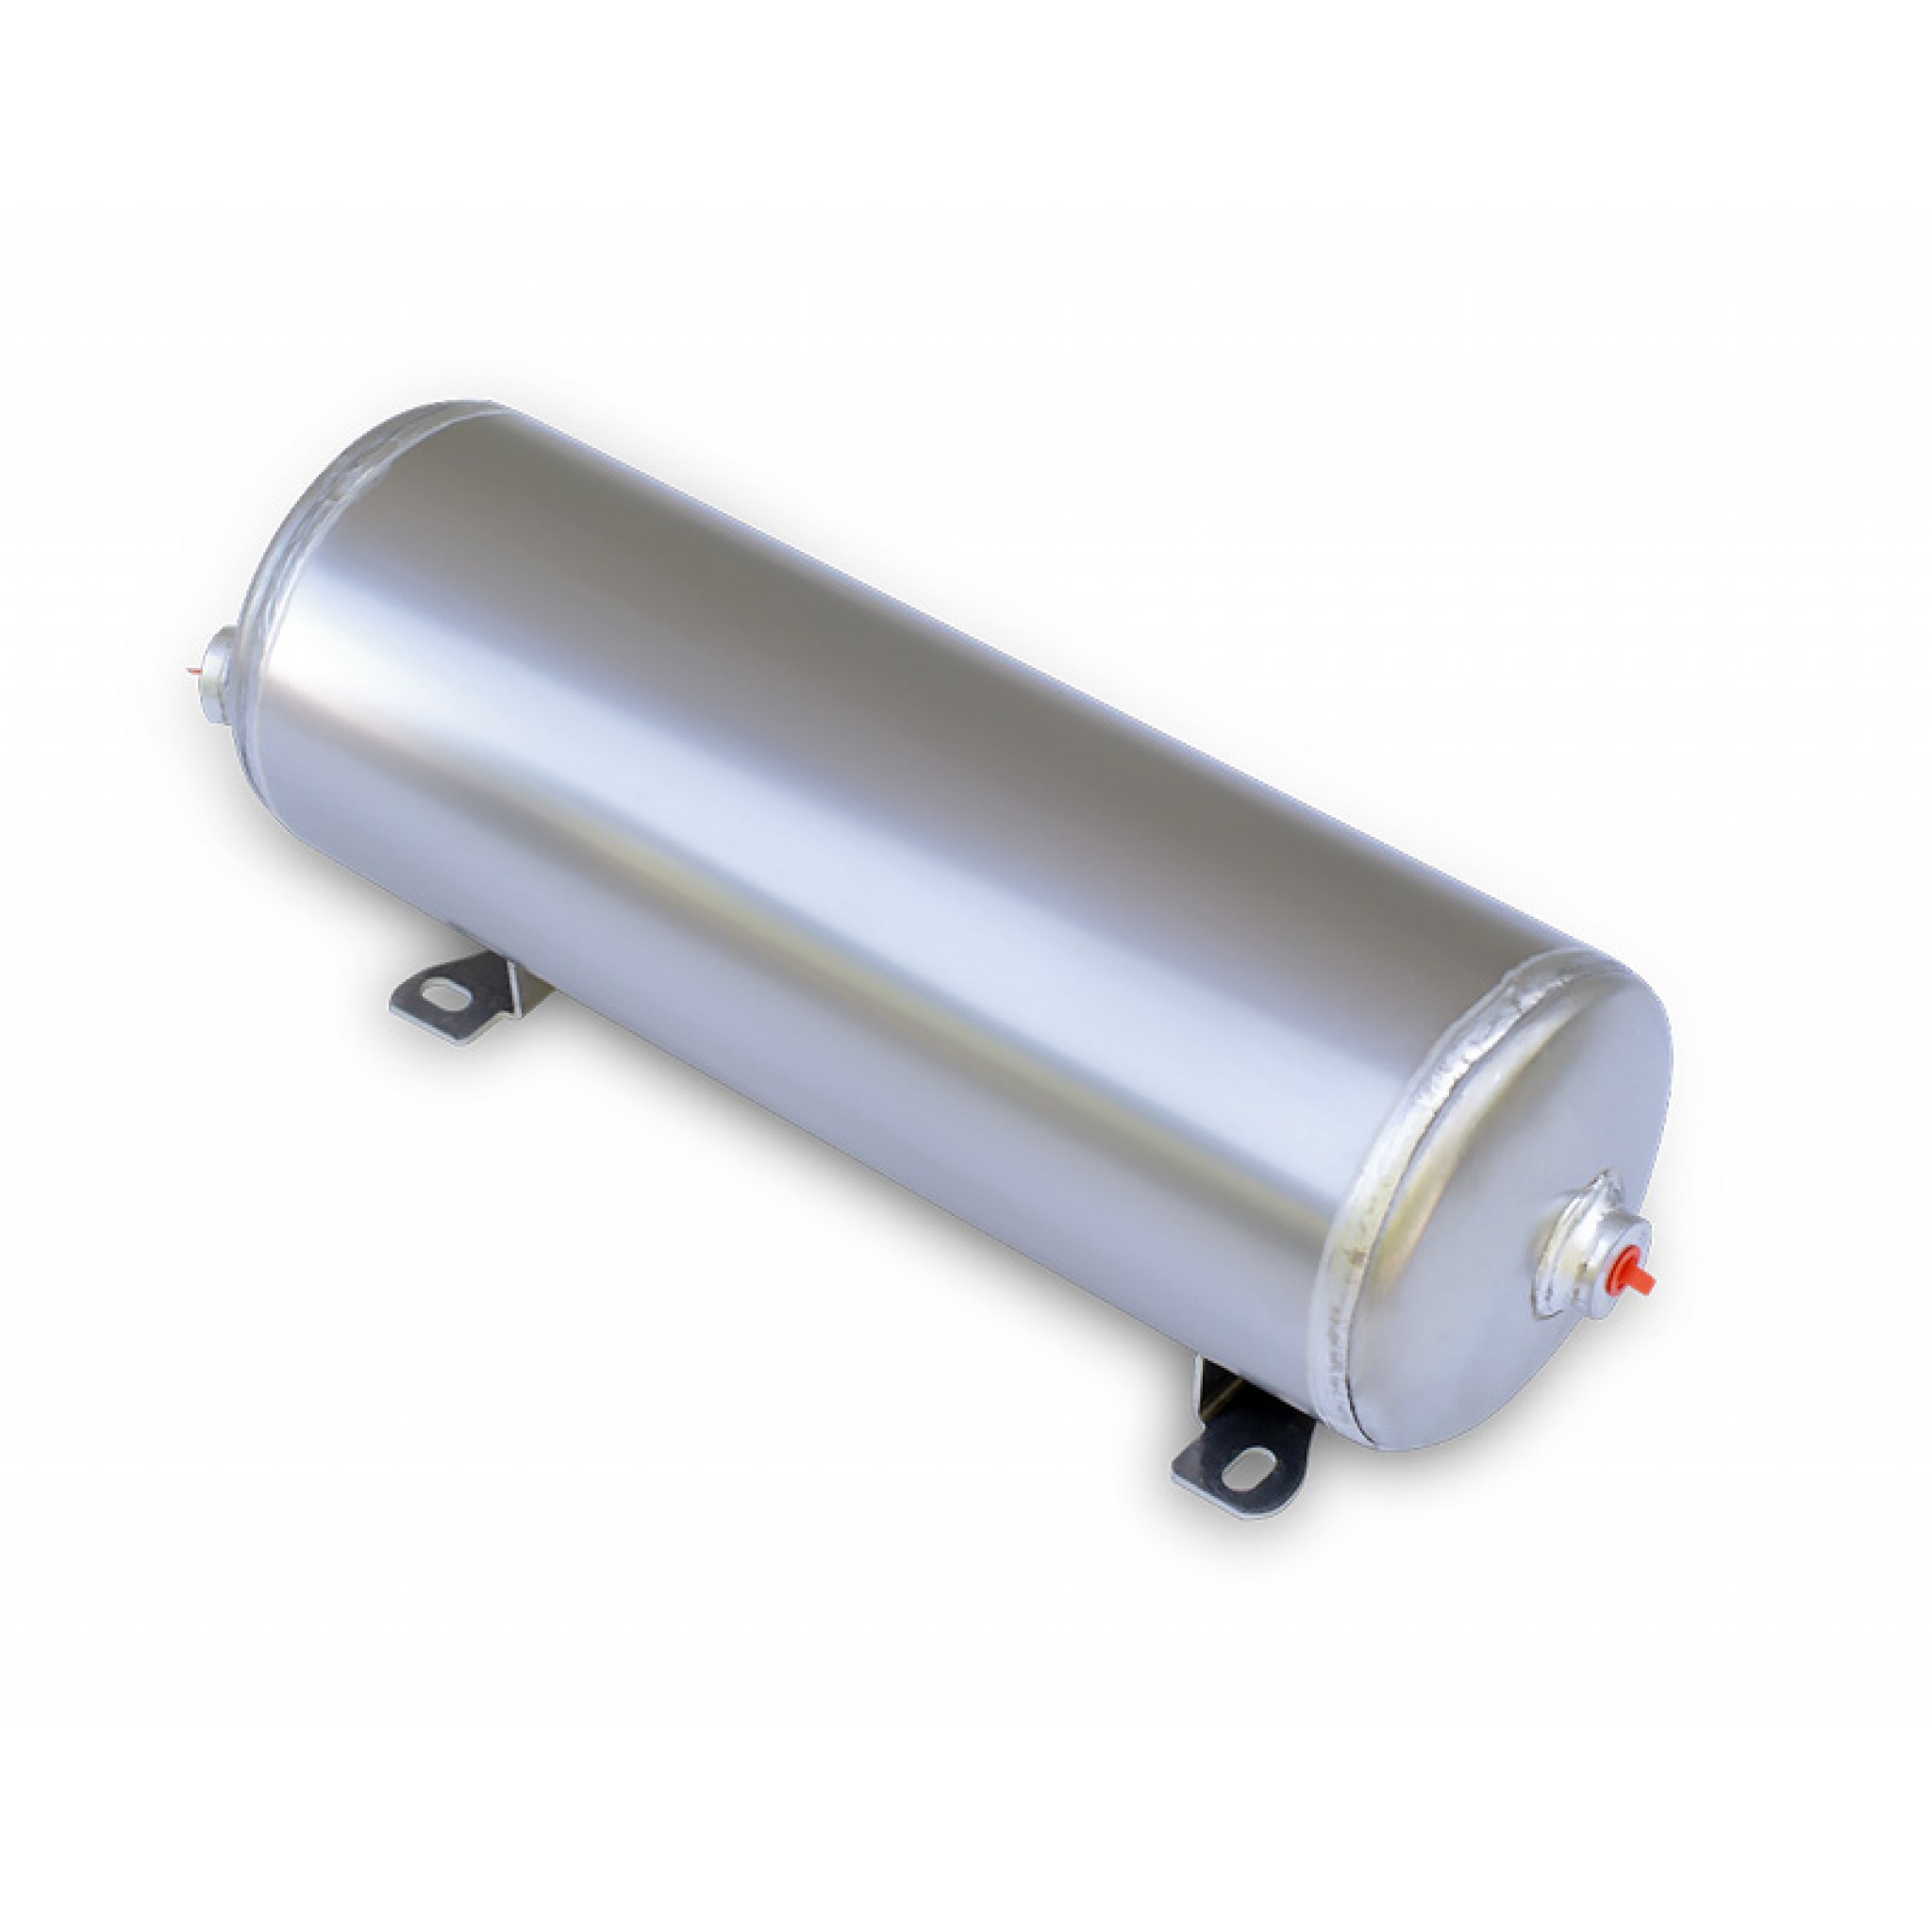 2 Gallon Aluminum Air Tank | Two 1/4" Ports and One 1/8" Port - Ridetech